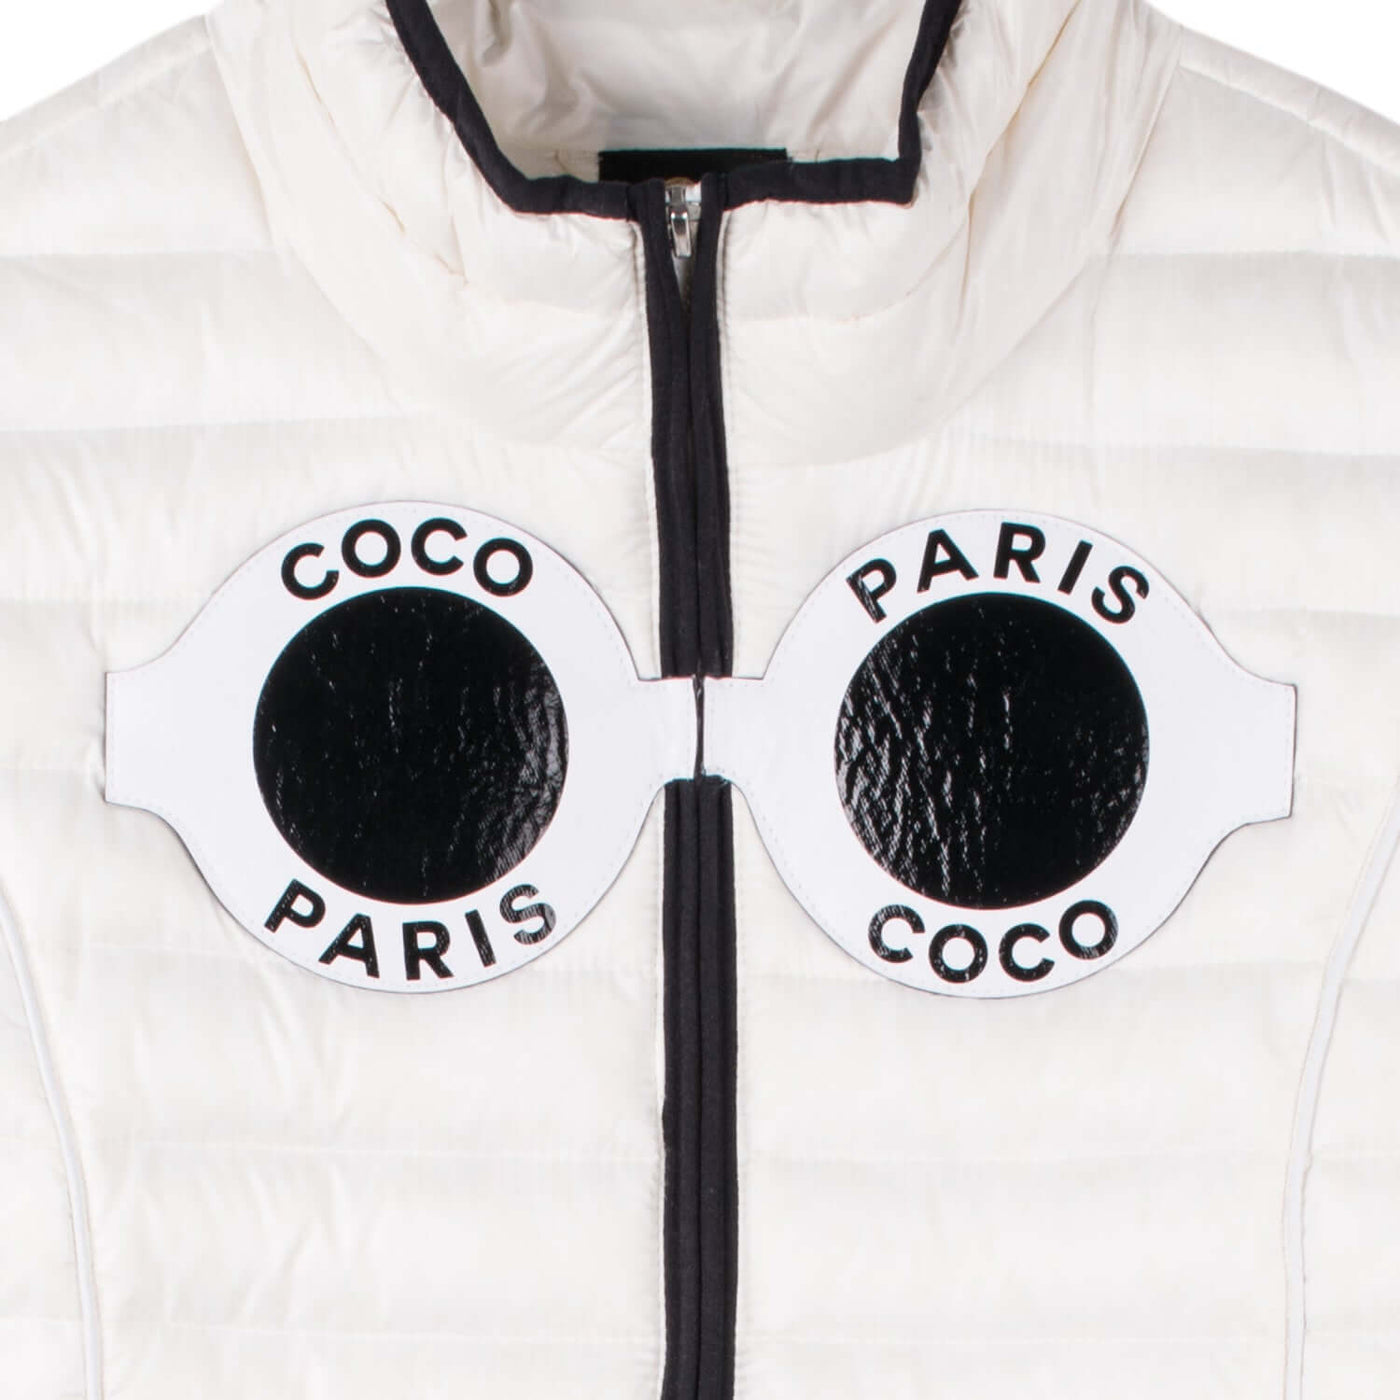 Down Jacket "Coco" - white (front, detail application)